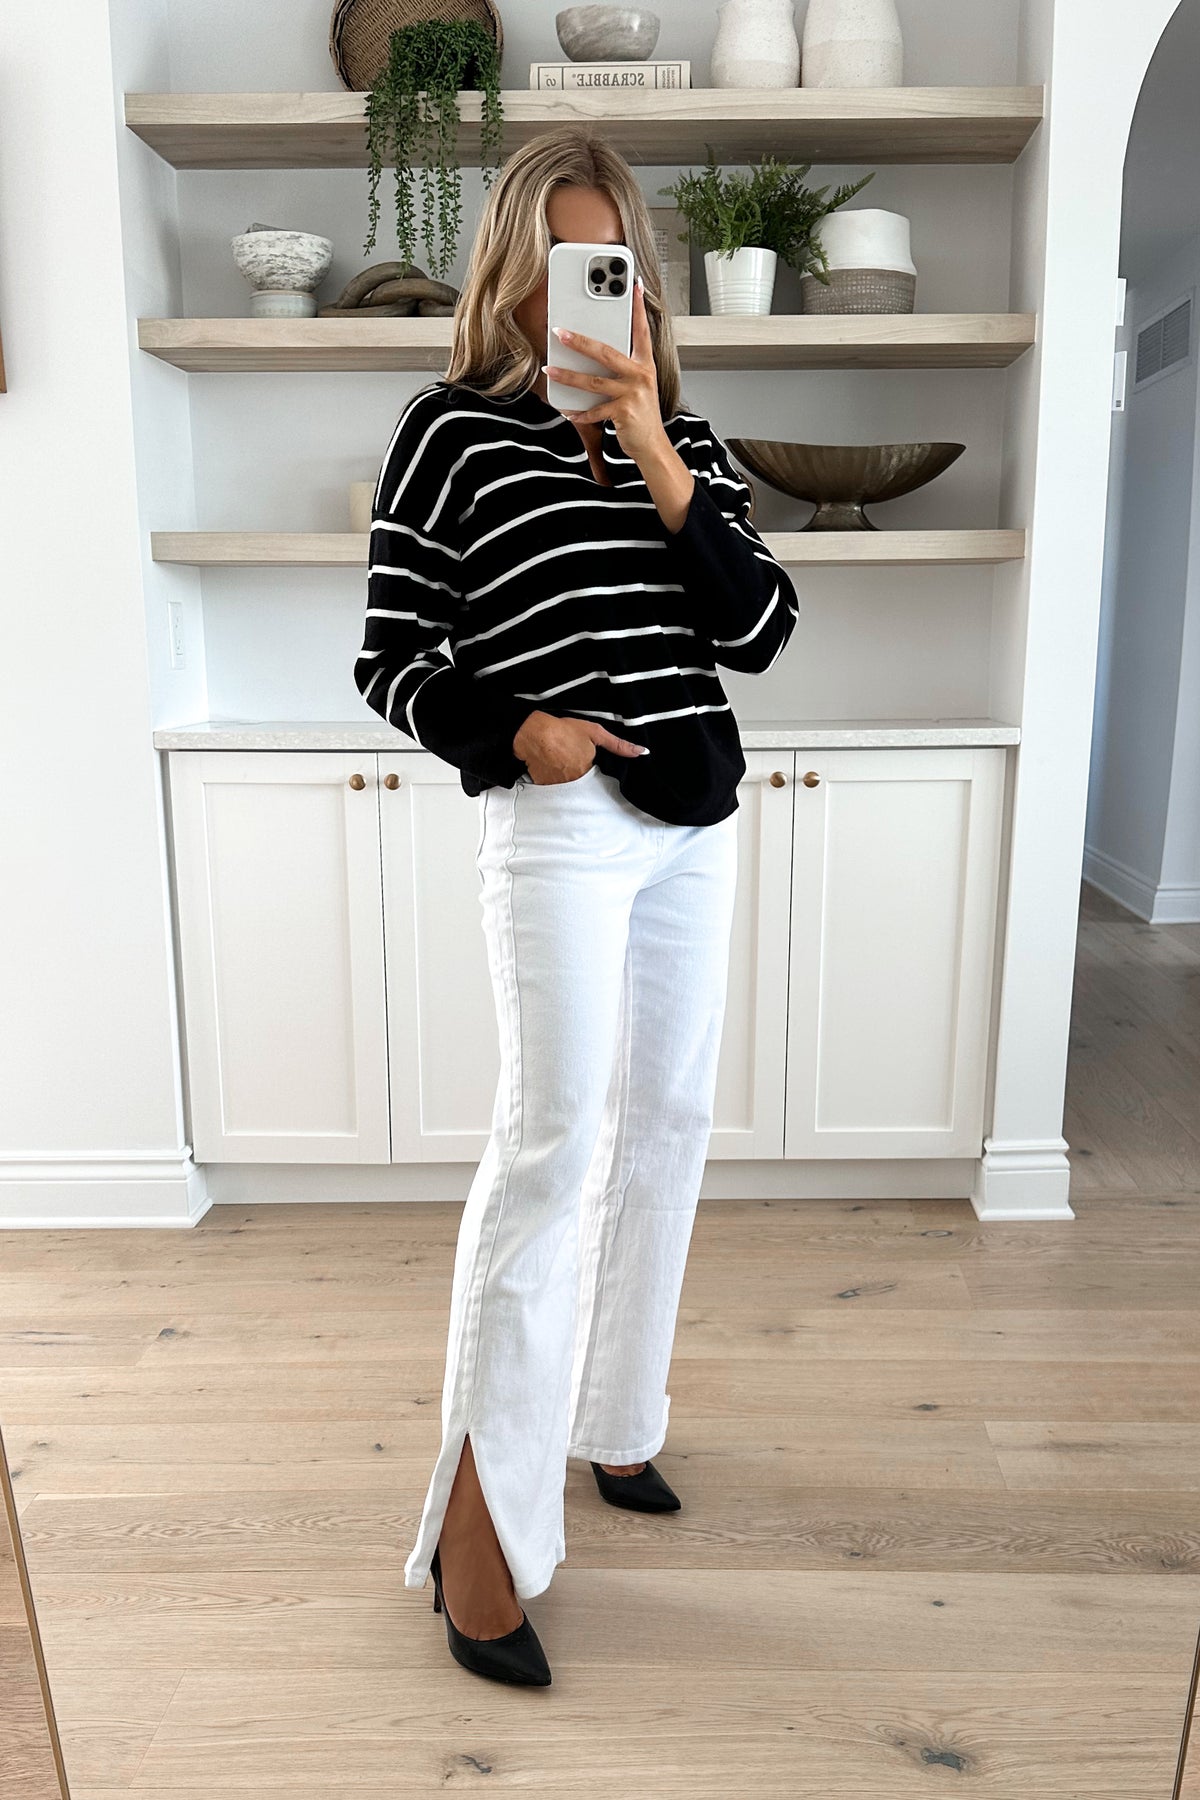 CLAY - White Jeans Wide Leg